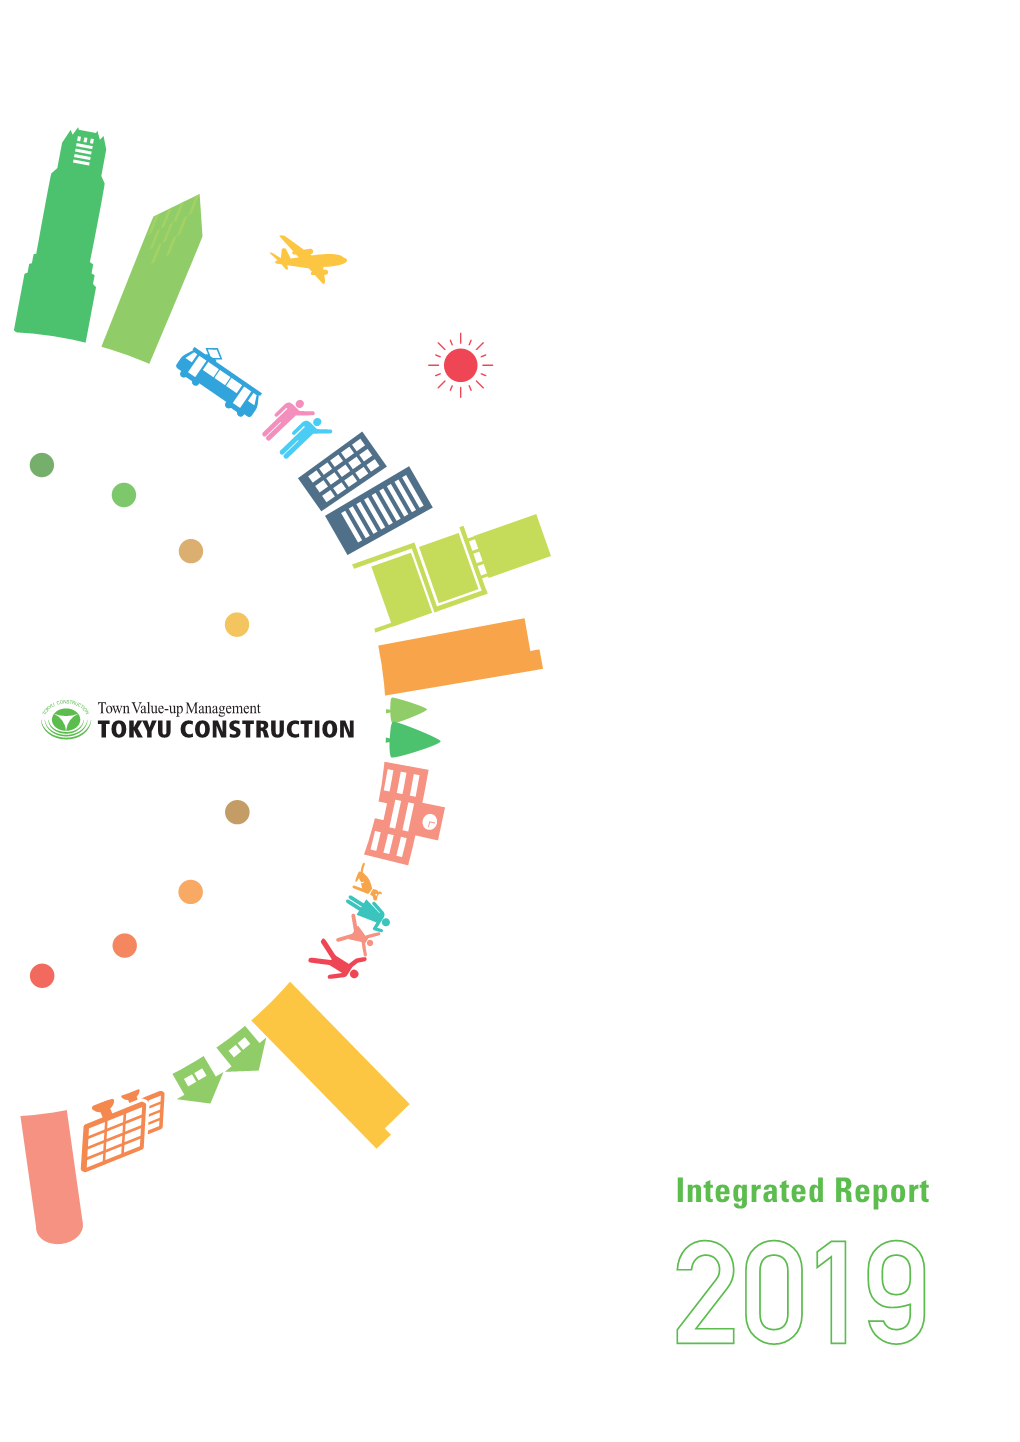 Integrated Report 2019 01 As a Member of the Tokyu Group